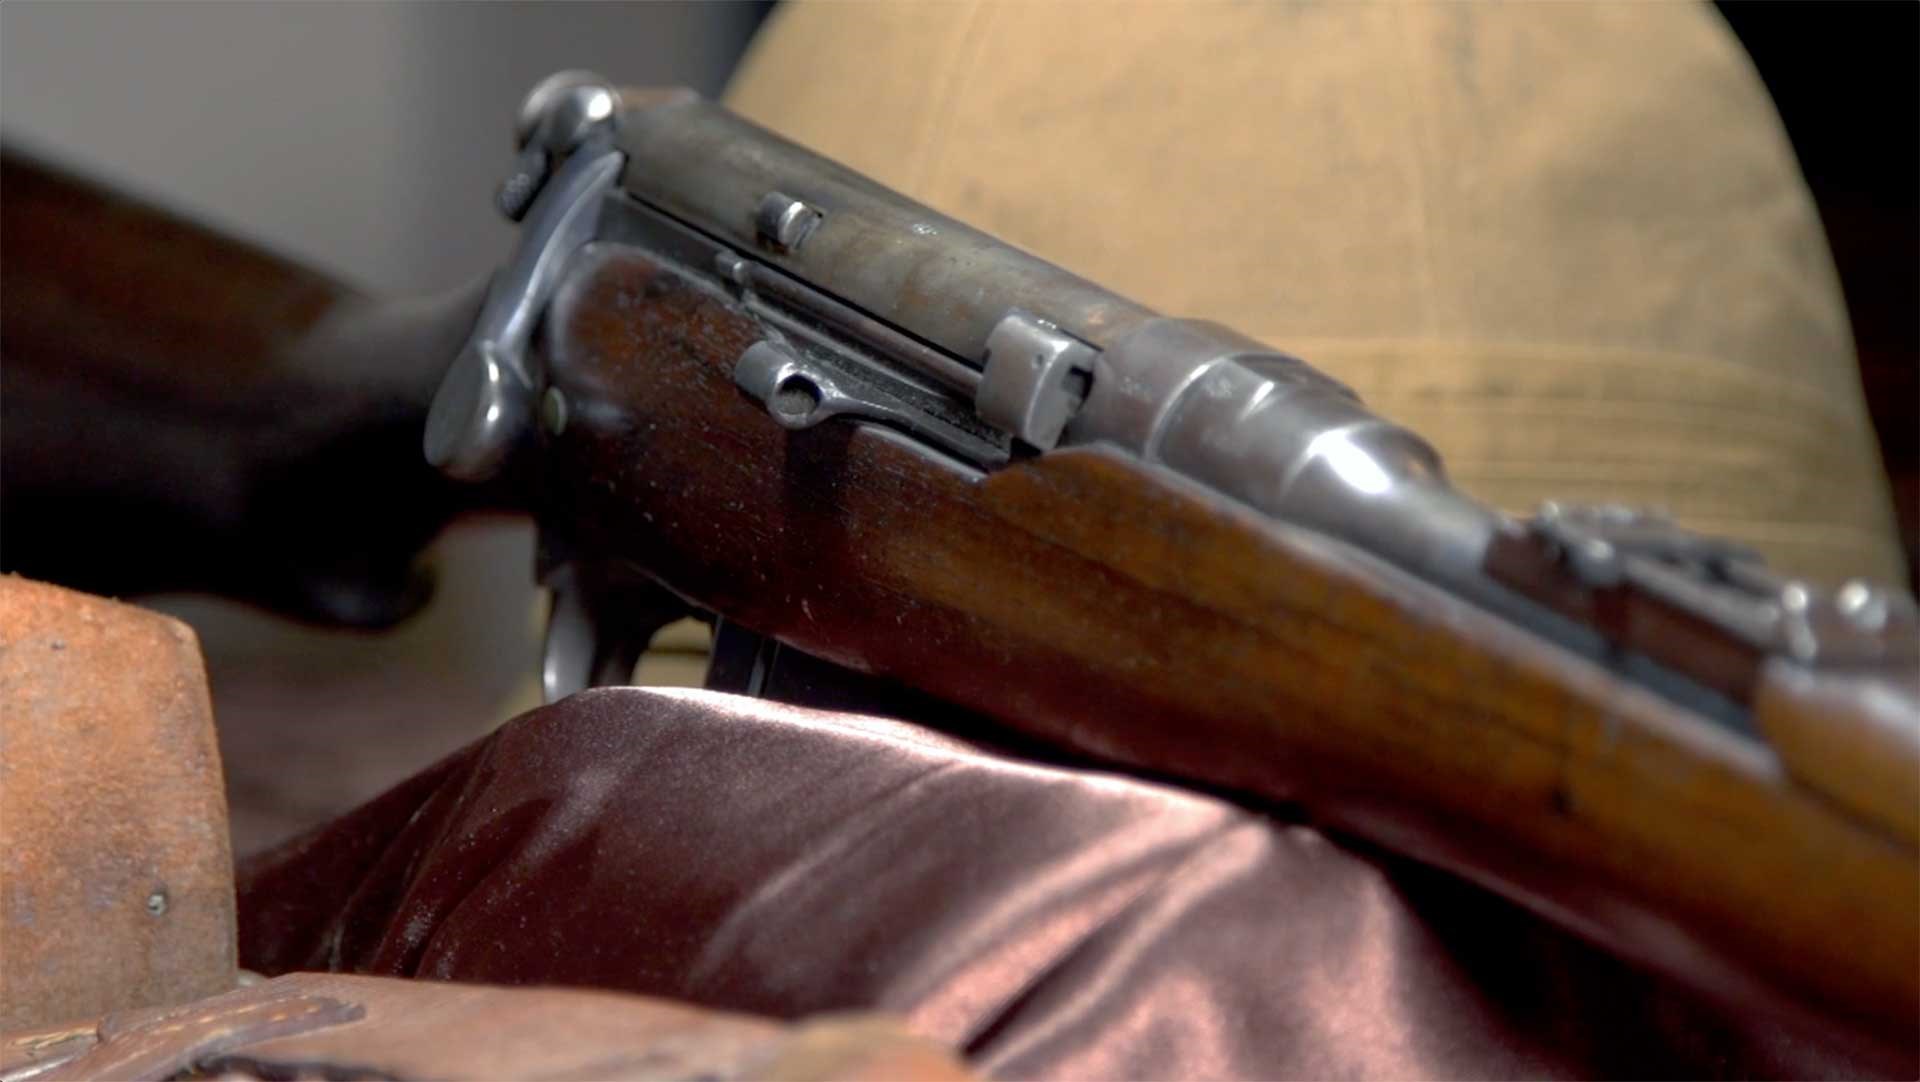 Right side of the Lee-Enfield carbine, showing the bolt handle and magazine cut-off.